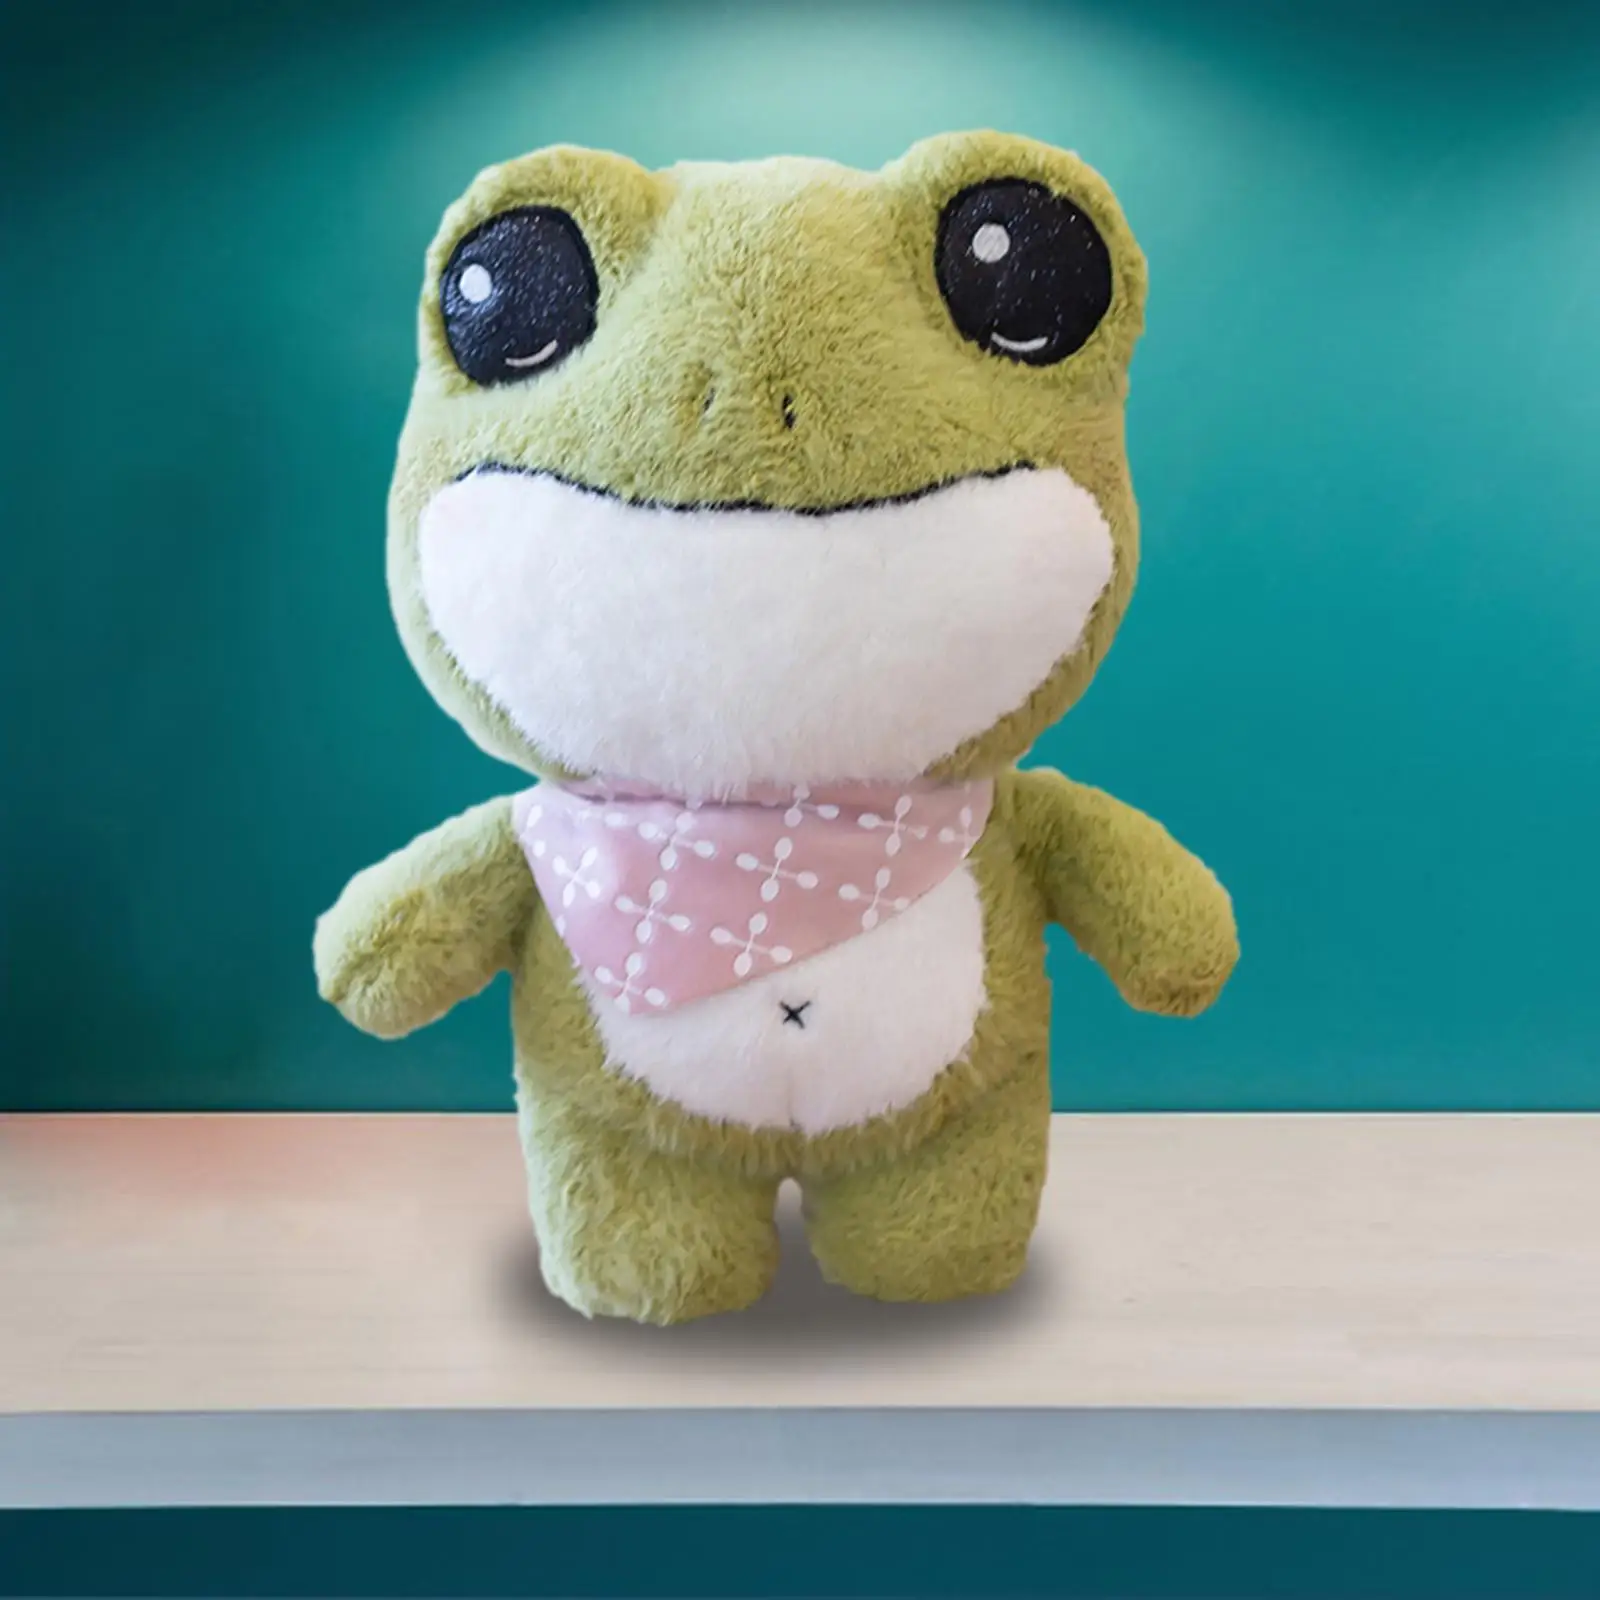 Adorable Frog Plush Toy Soft Green Frog Doll Home Decoration 30cm with Clothes